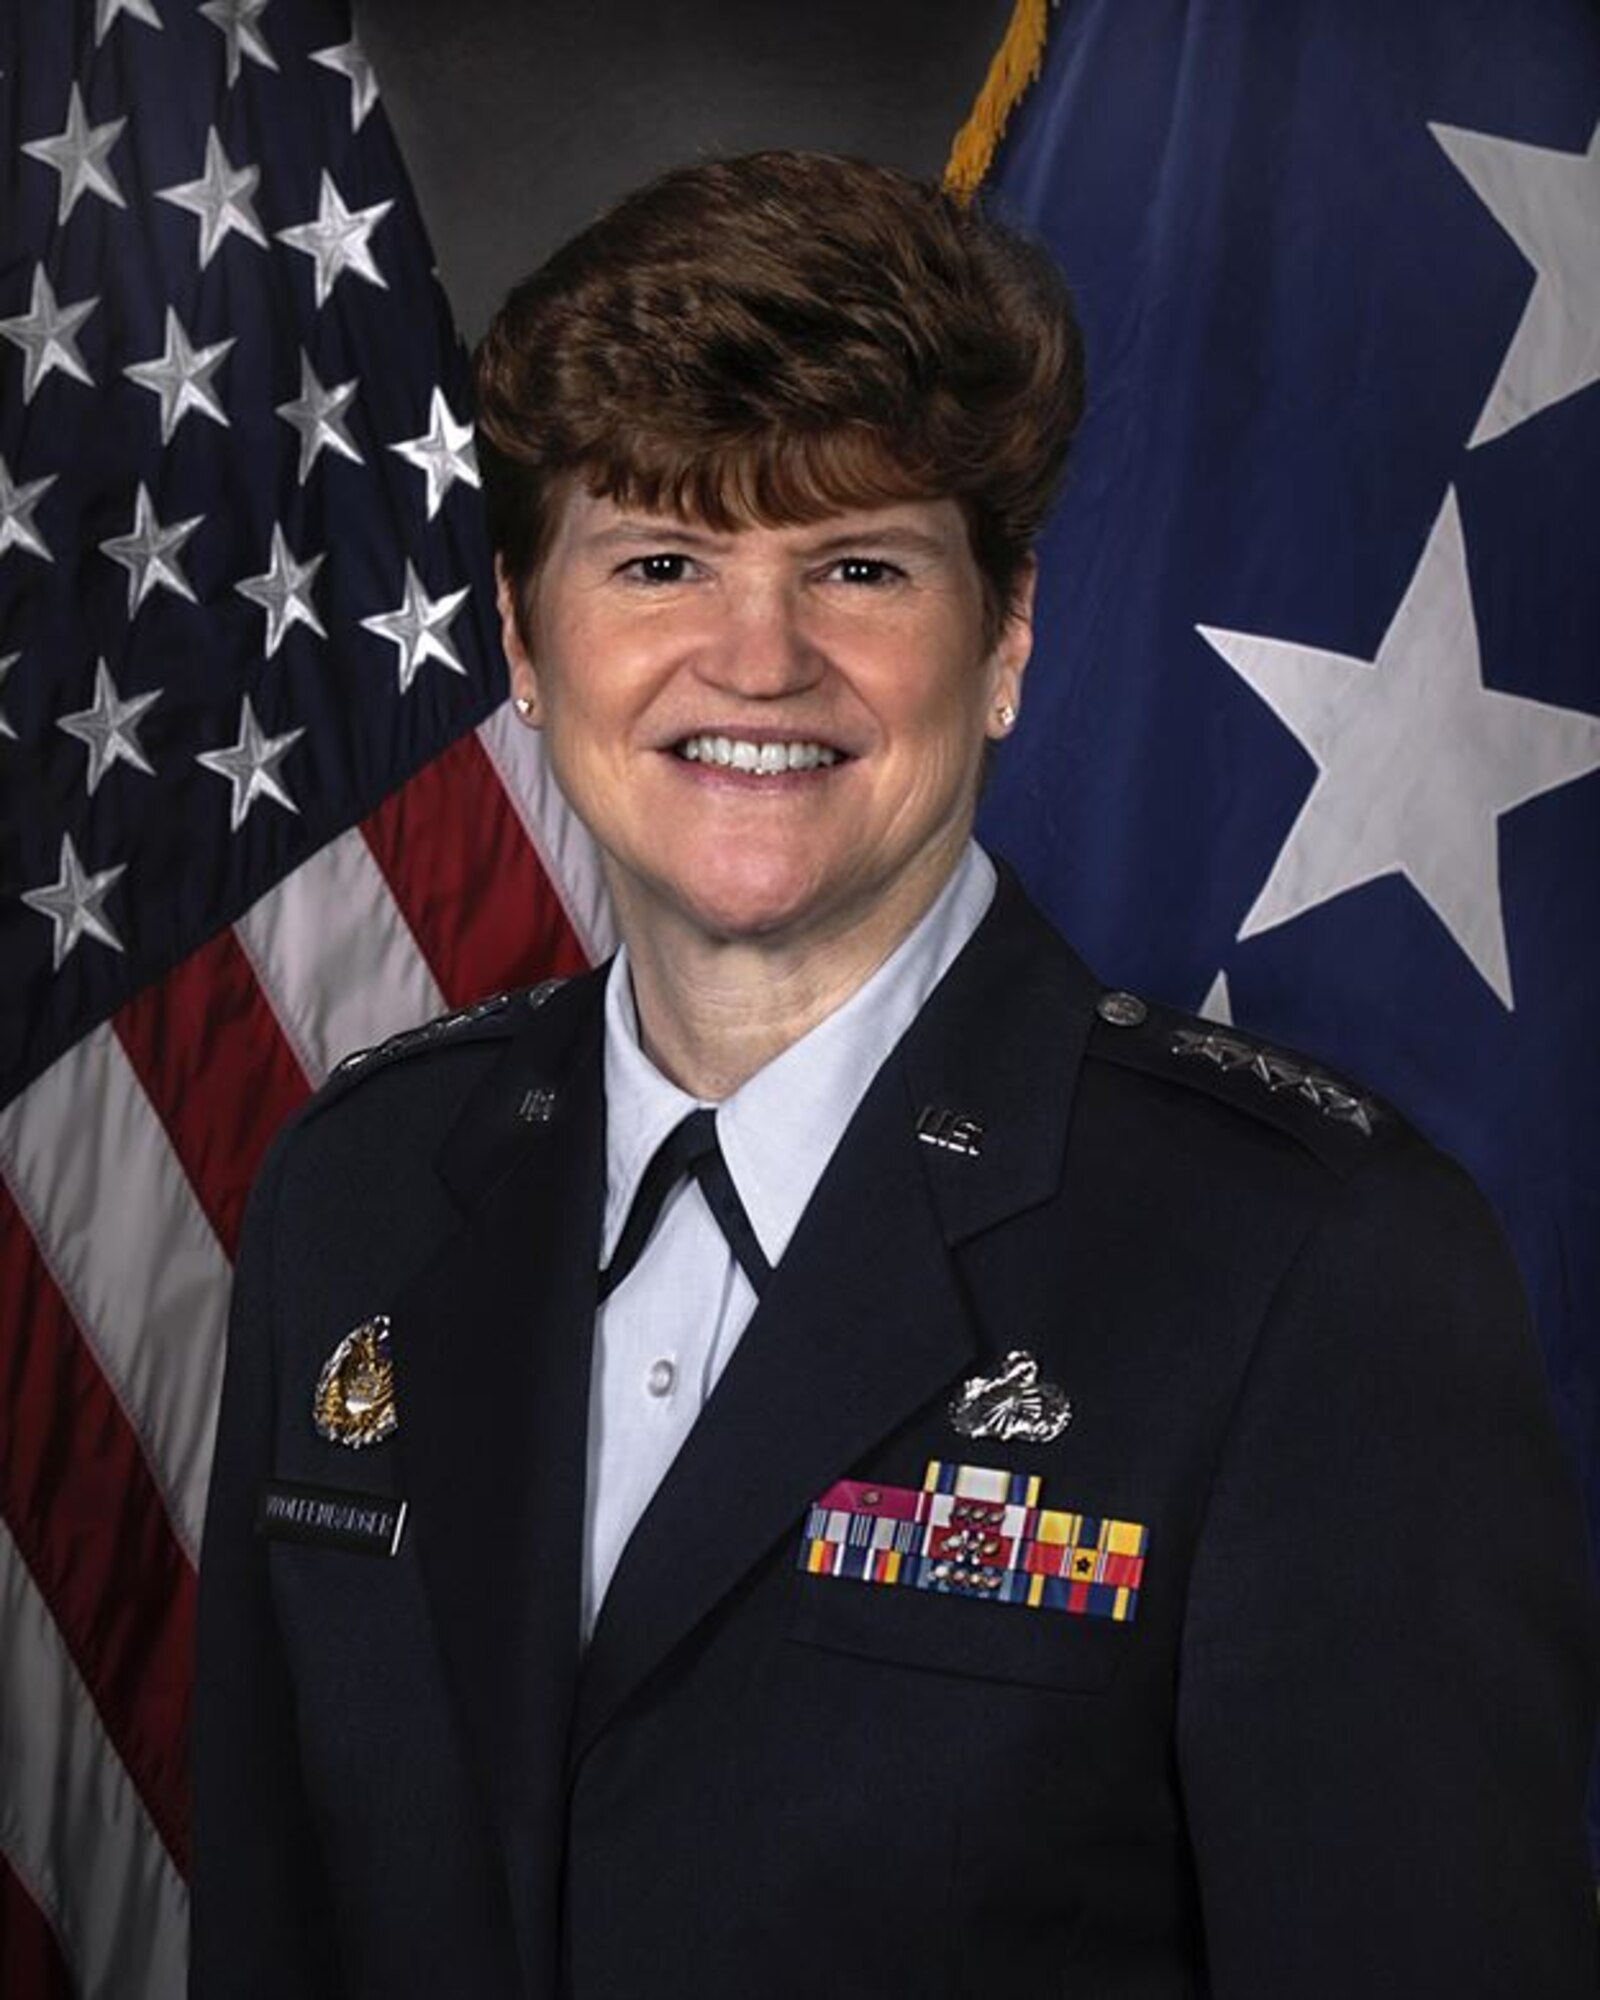 While active duty, Gen. Janet C. Wolfenbarger served as commander of Air Force Materiel Command at Wright-Patterson Air Force Base, Ohio. Wolfenbarger became the first woman to achieve four-star general rank in the Air Force. She retired from military service in 2015 and has been named as the new chairperson of the Defense Advisory Committee on Women in the Services. (U.S. Air Force photo)